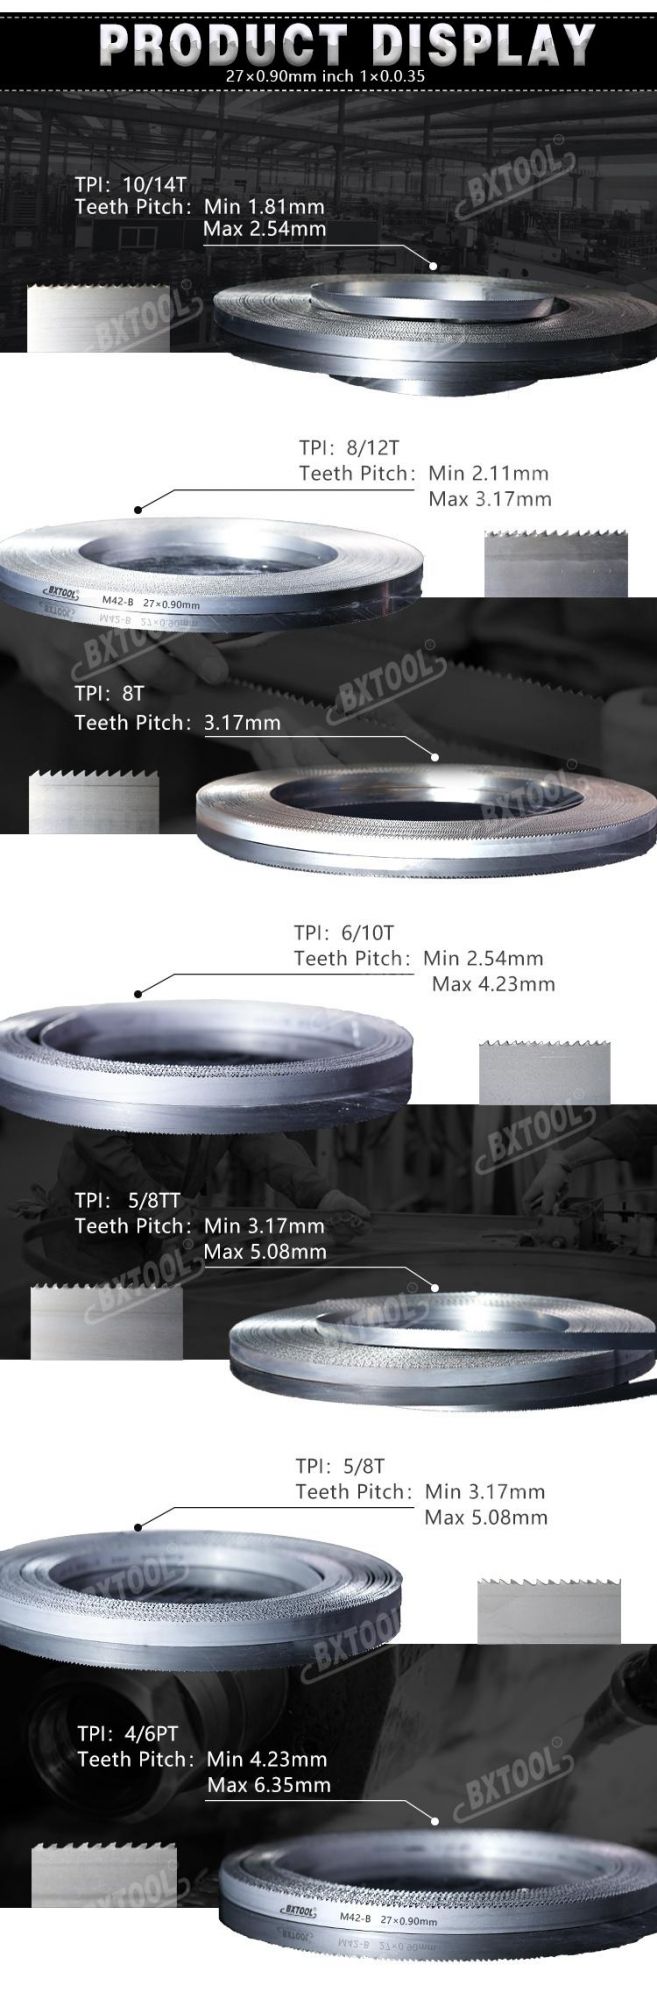 3505*27*0.9*3/4t M42 Best Quality Bimetal Band Saw Blade Cutting Stainless Steel